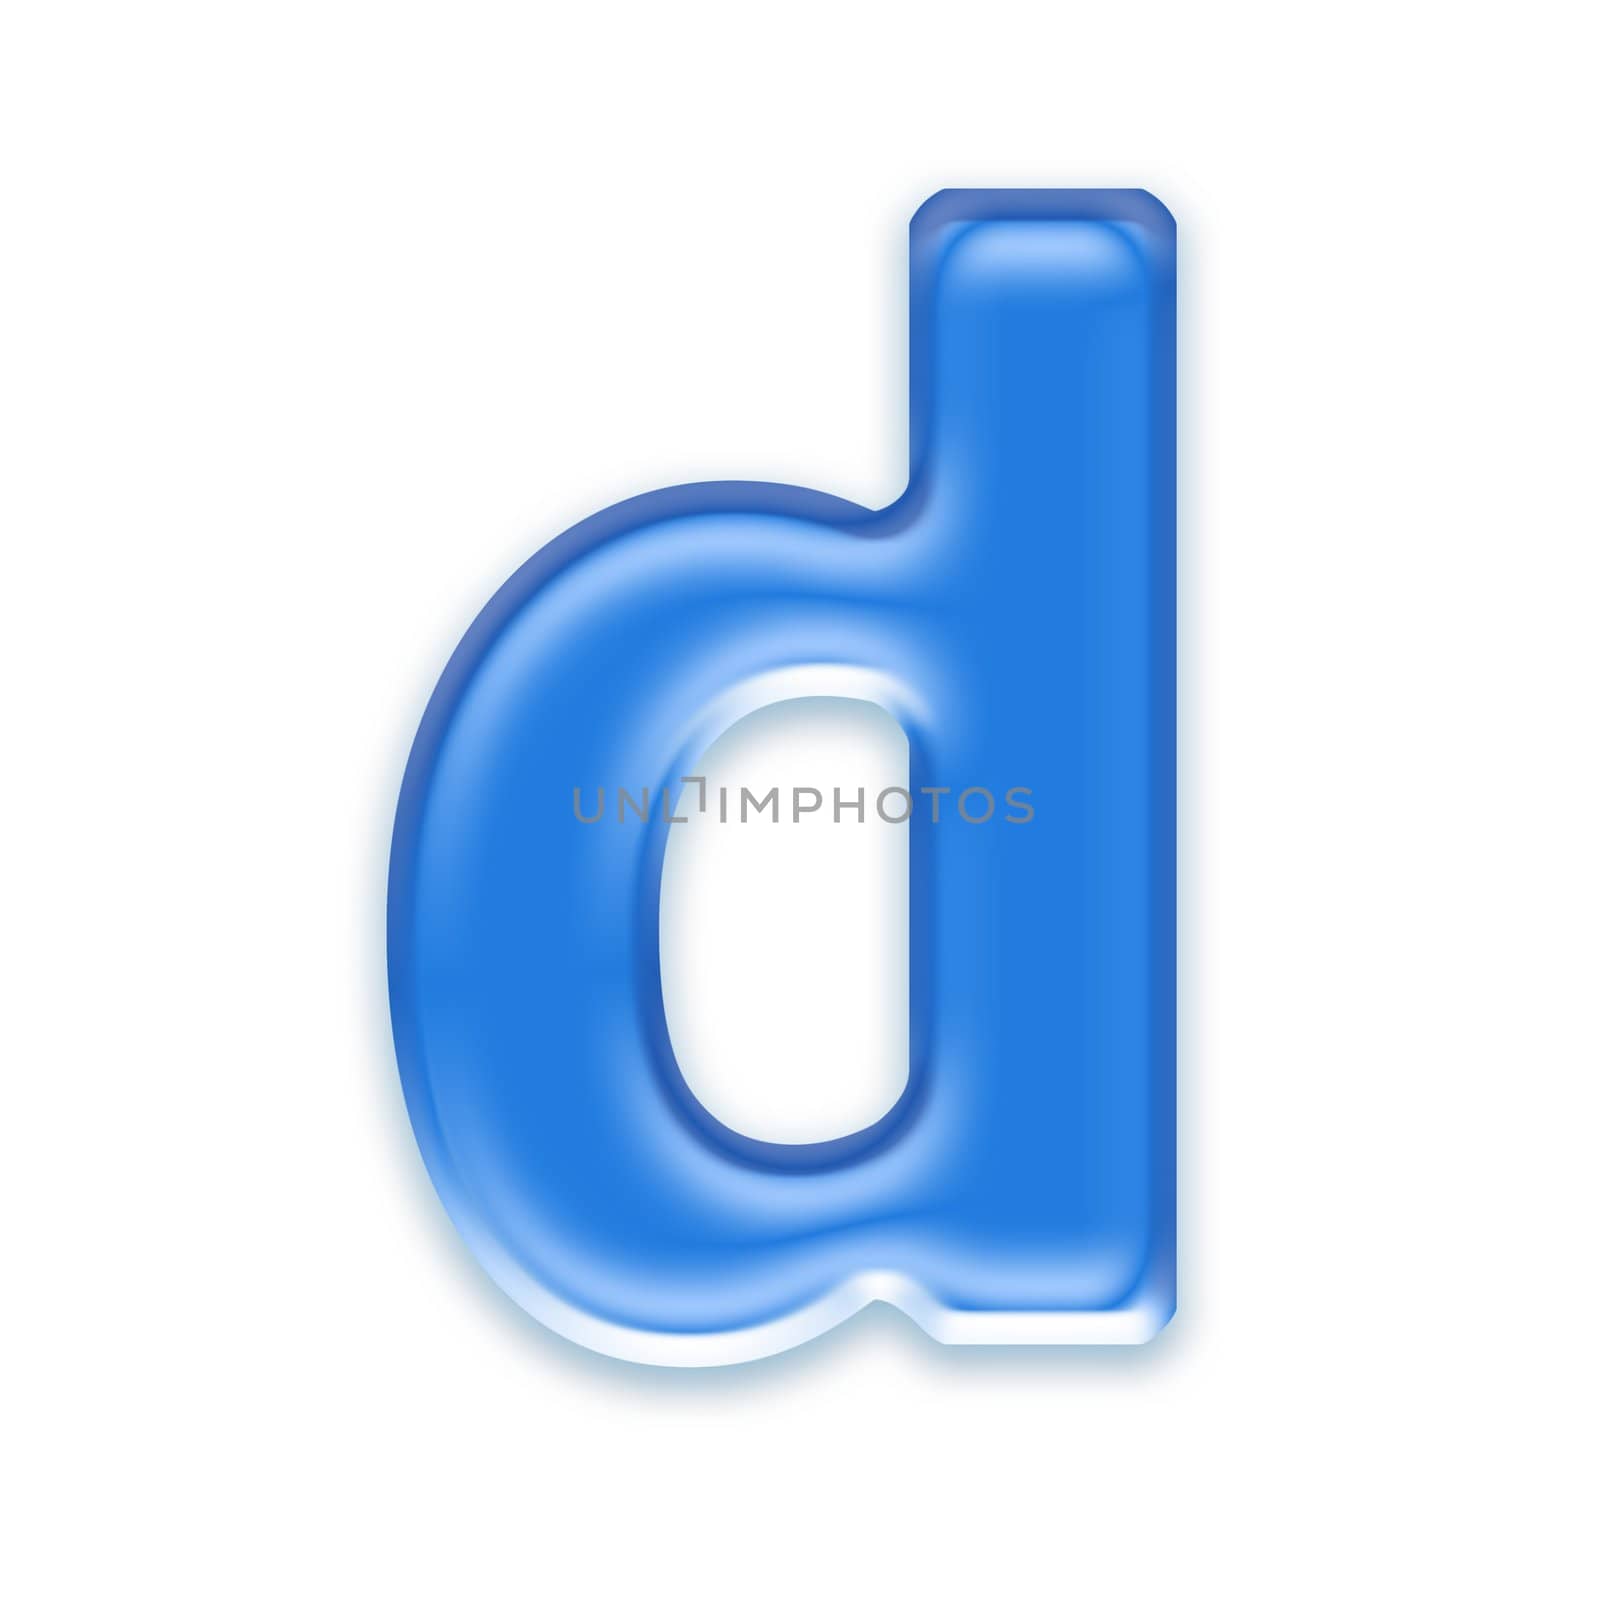 Aqua letter isolated on white background  - d by chrisroll